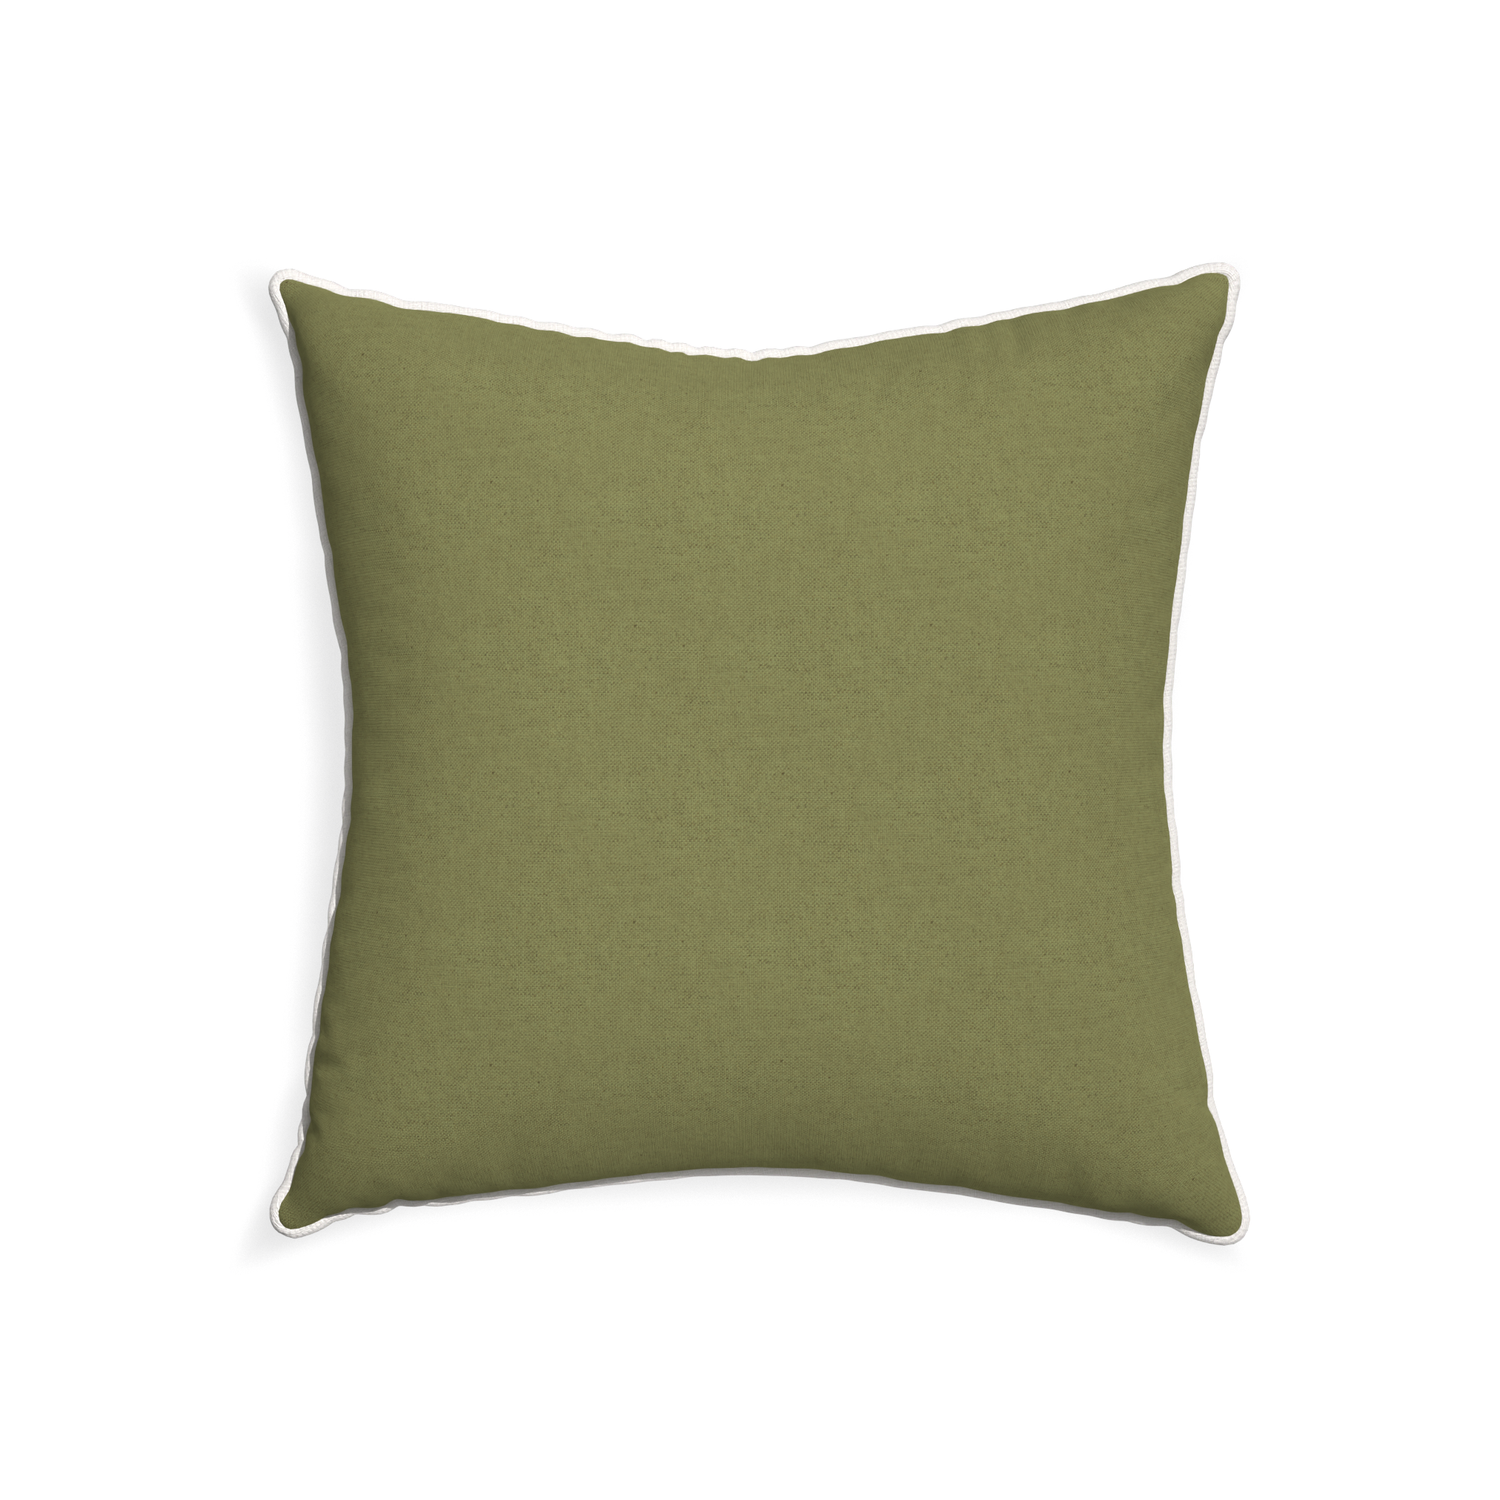 22-square moss custom moss greenpillow with snow piping on white background